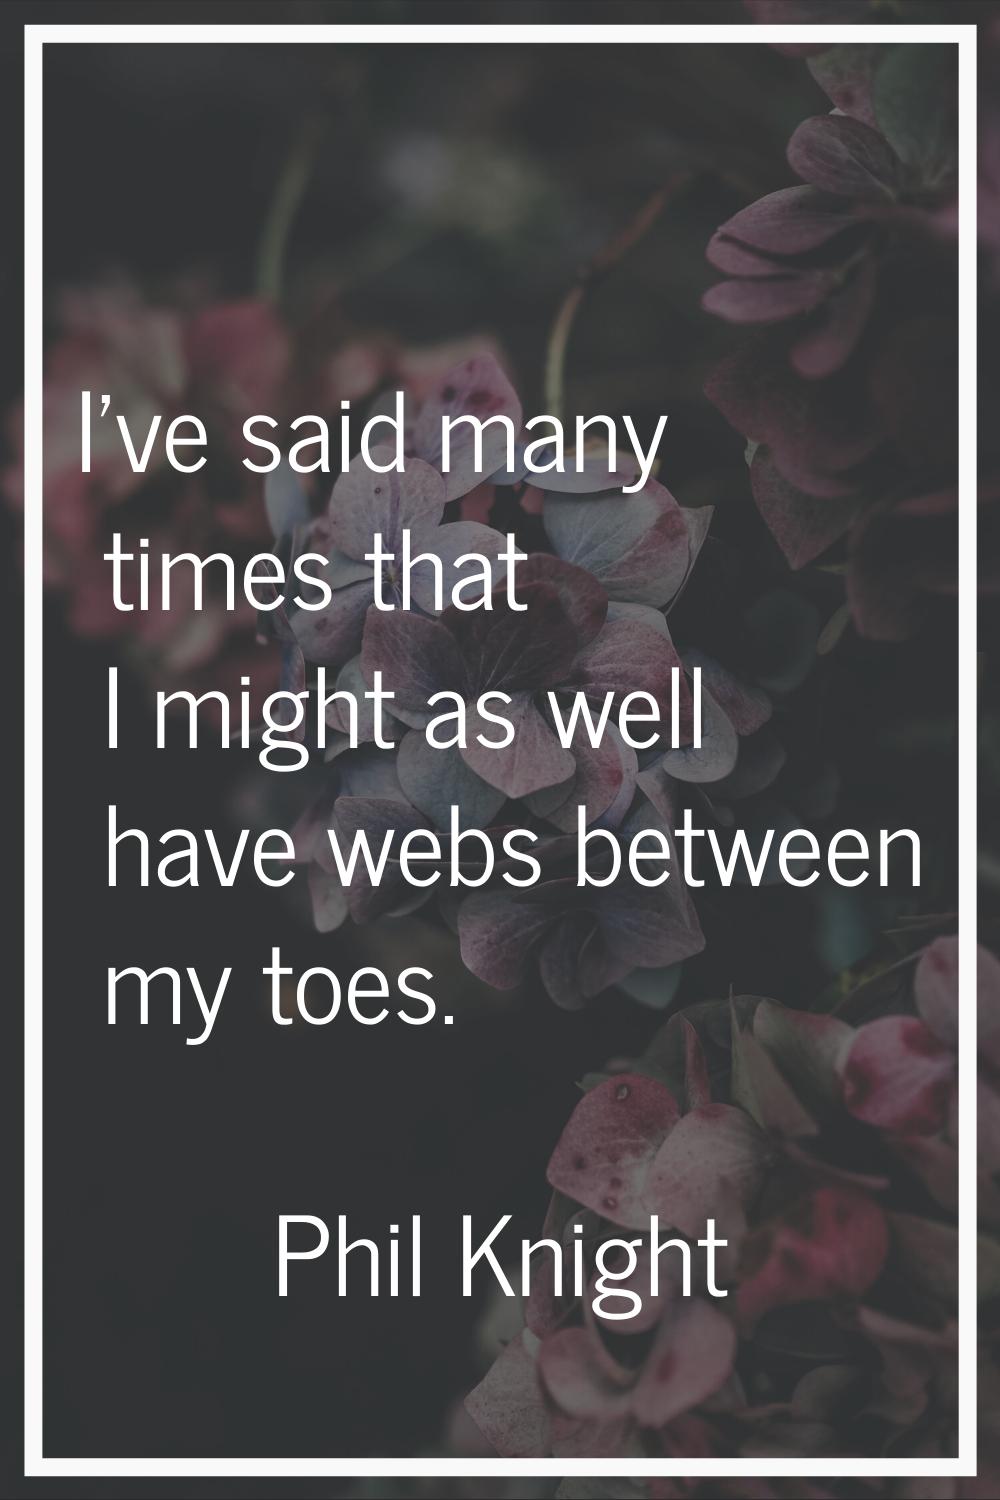 I've said many times that I might as well have webs between my toes.